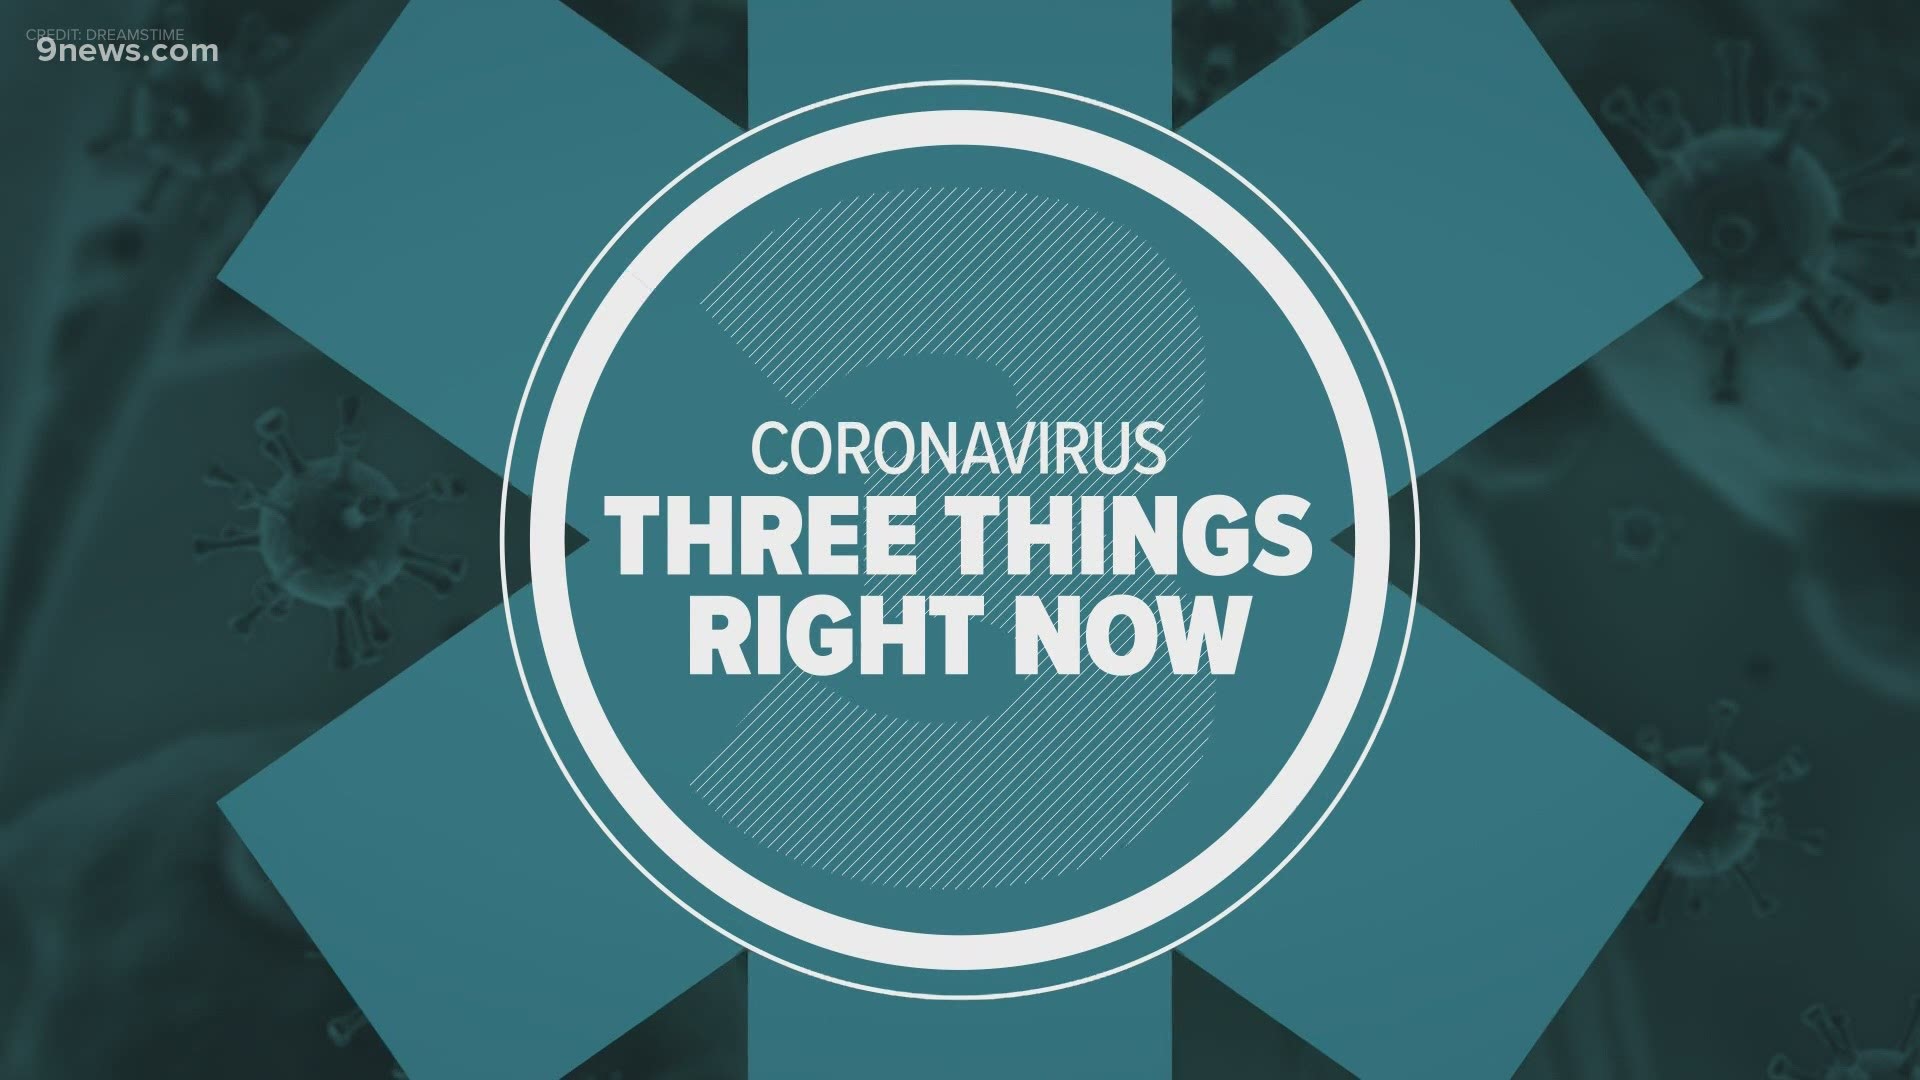 Here are three things to know about COVID-19 on the morning of June 15.